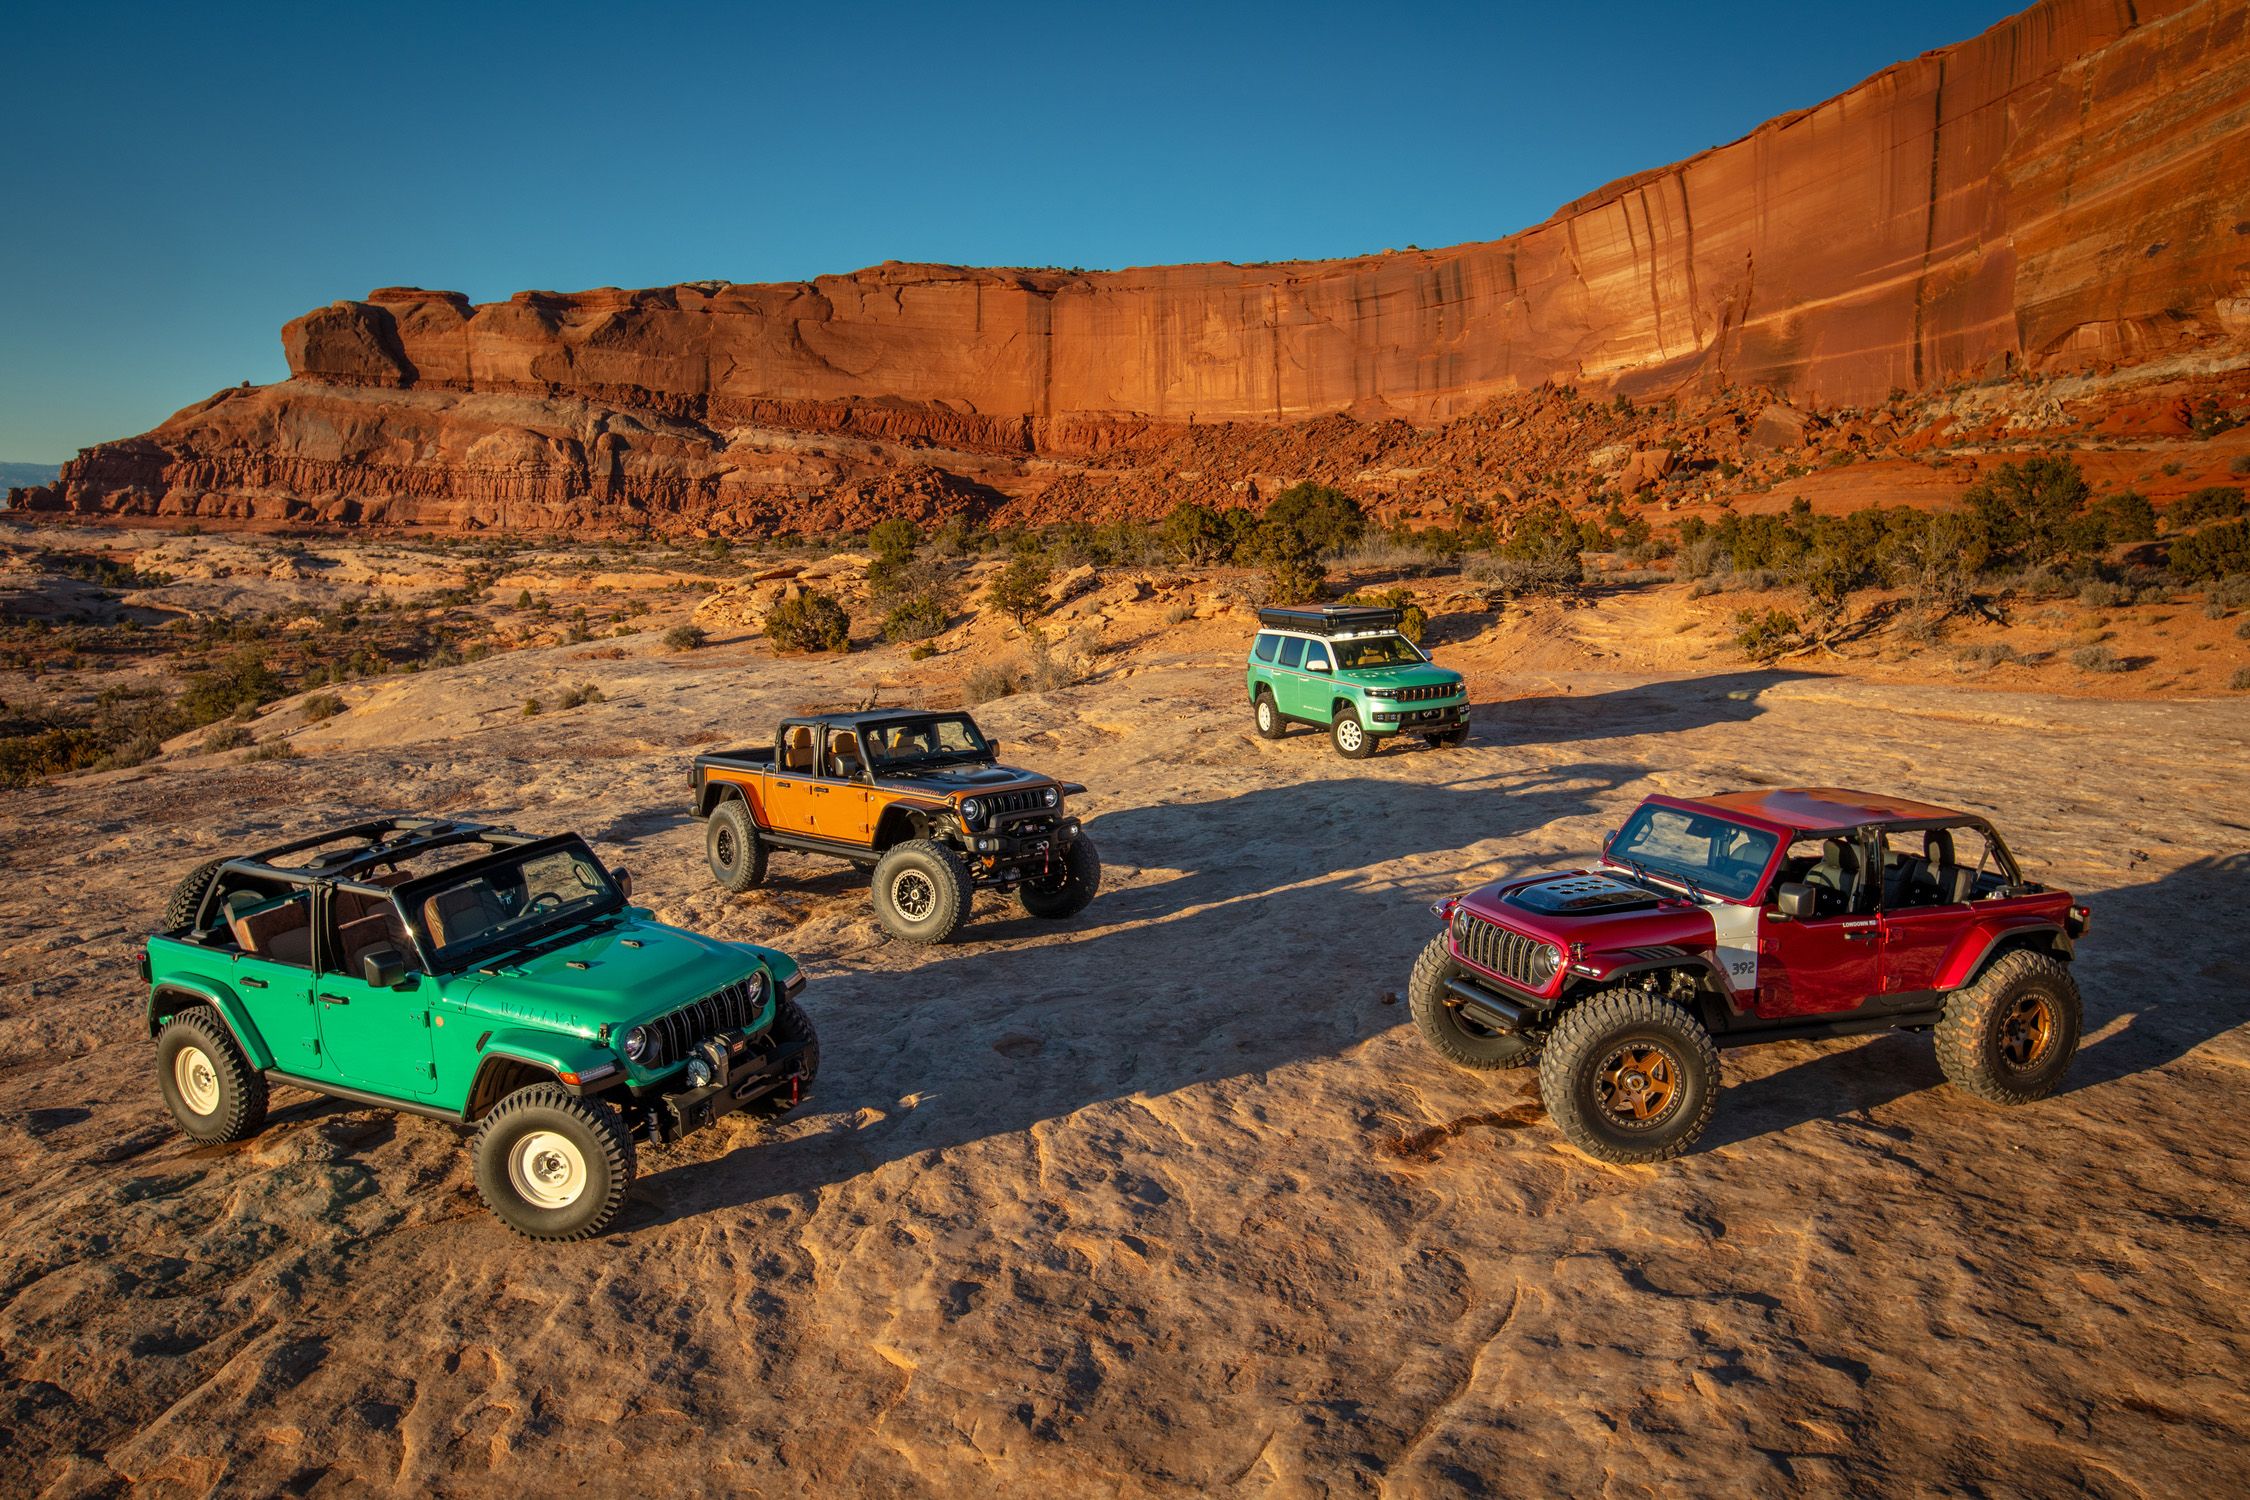 <p>Spring means Easter, and for the <a href="https://www.caranddriver.com/jeep">Jeep</a> faithful, that means the annual pilgrimage to Moab, Utah, for the Easter Jeep Safari. 2024 marks the 58th annual gathering, and, as has been the tradition for the past few years, Jeep has granted its talented crew of in-house designers the freedom to create a small batch of one-off concepts that express their artistic vision in fully realized concepts that might otherwise never make it past the drawing board. Plus, it's a great way to get some public input on stylistic themes, accessories, and functional add-ons that might already be in consideration for production. Here are the four concepts they cooked up for 2024.</p>